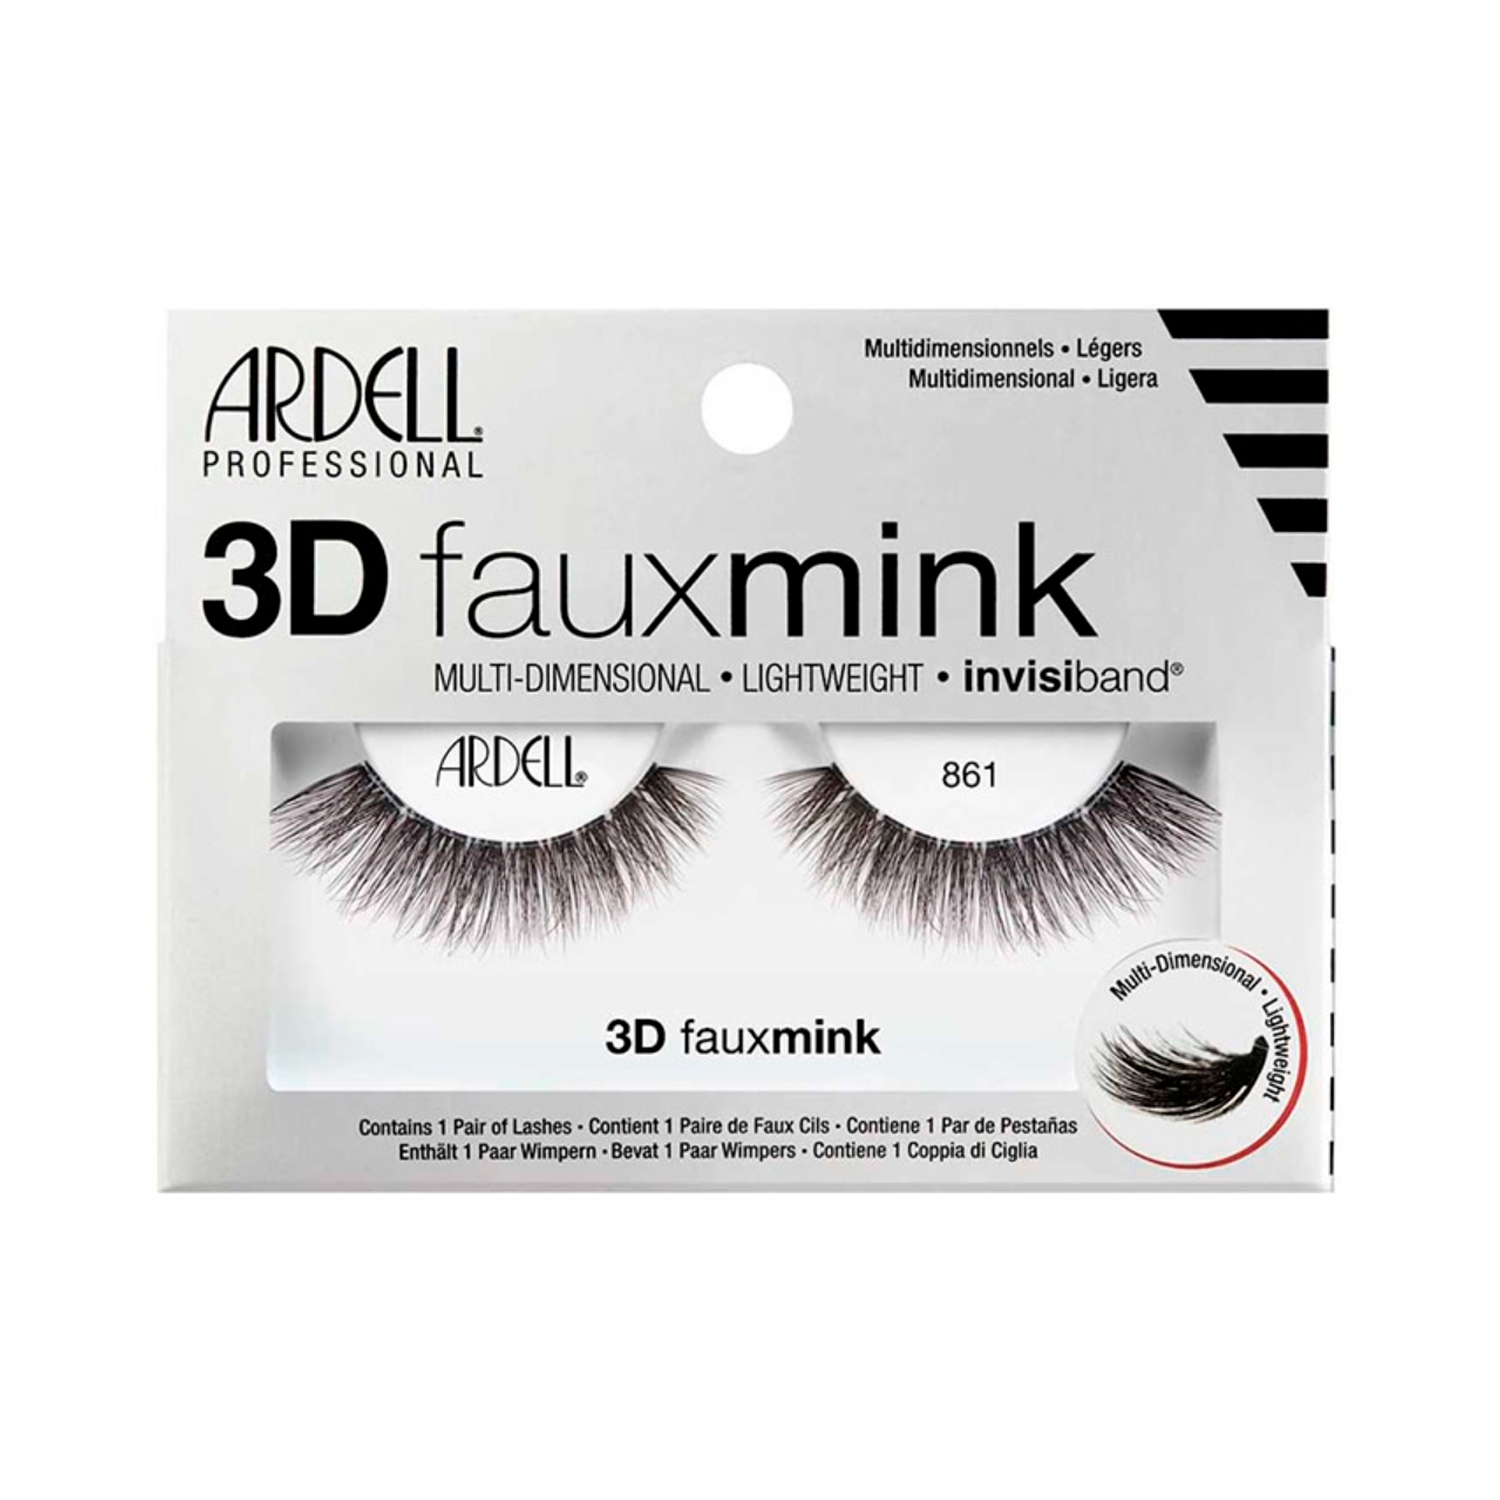 Ardell | Ardell 3D Faux Mink Eyelashes 861 Black - 70484 (1 Pair)